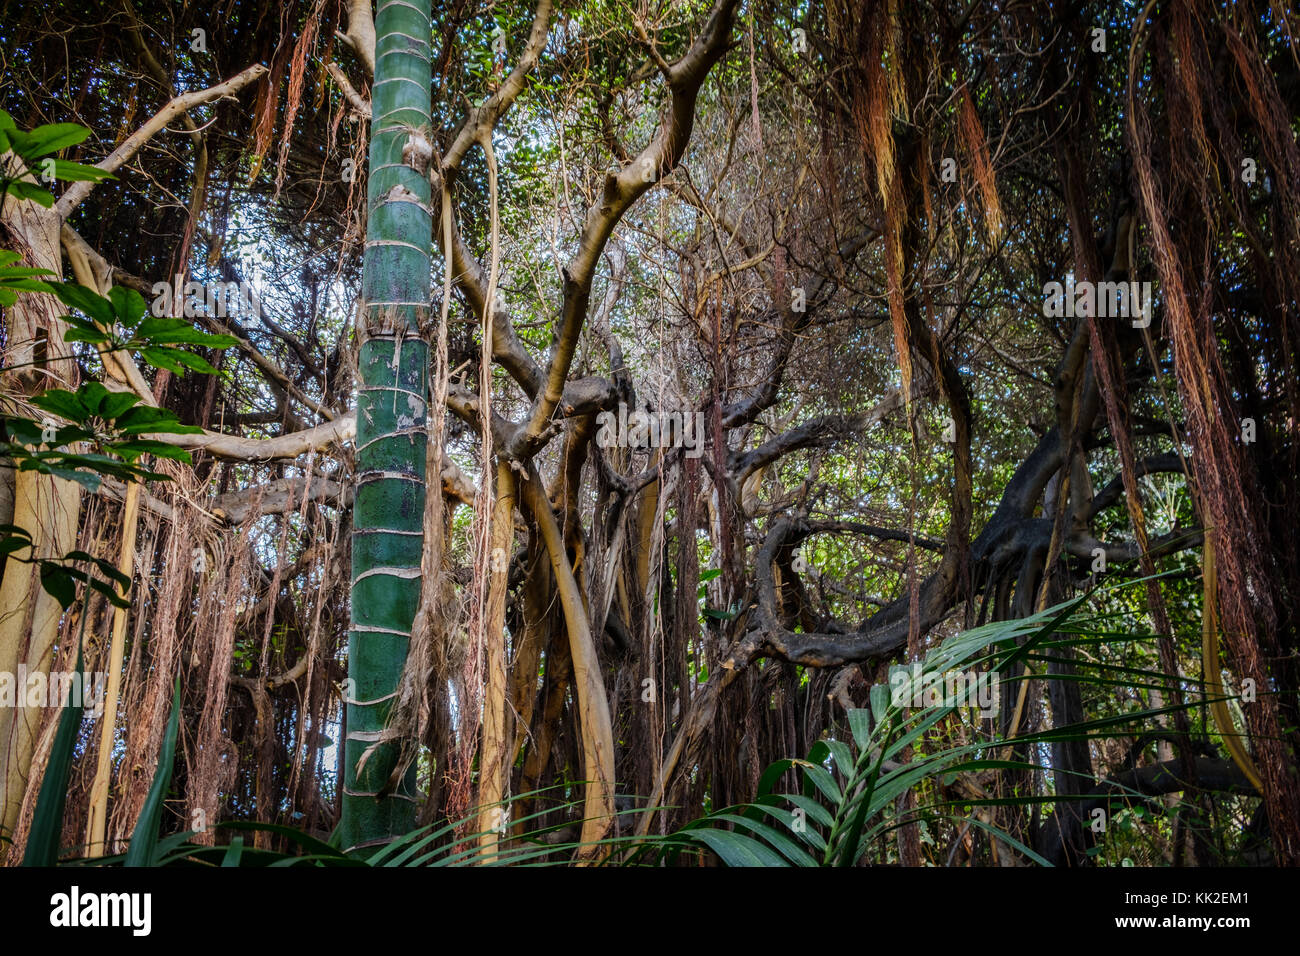 aerial roots and lianes hanging from trees inside tropical forest / rainforest / jungle Stock Photo